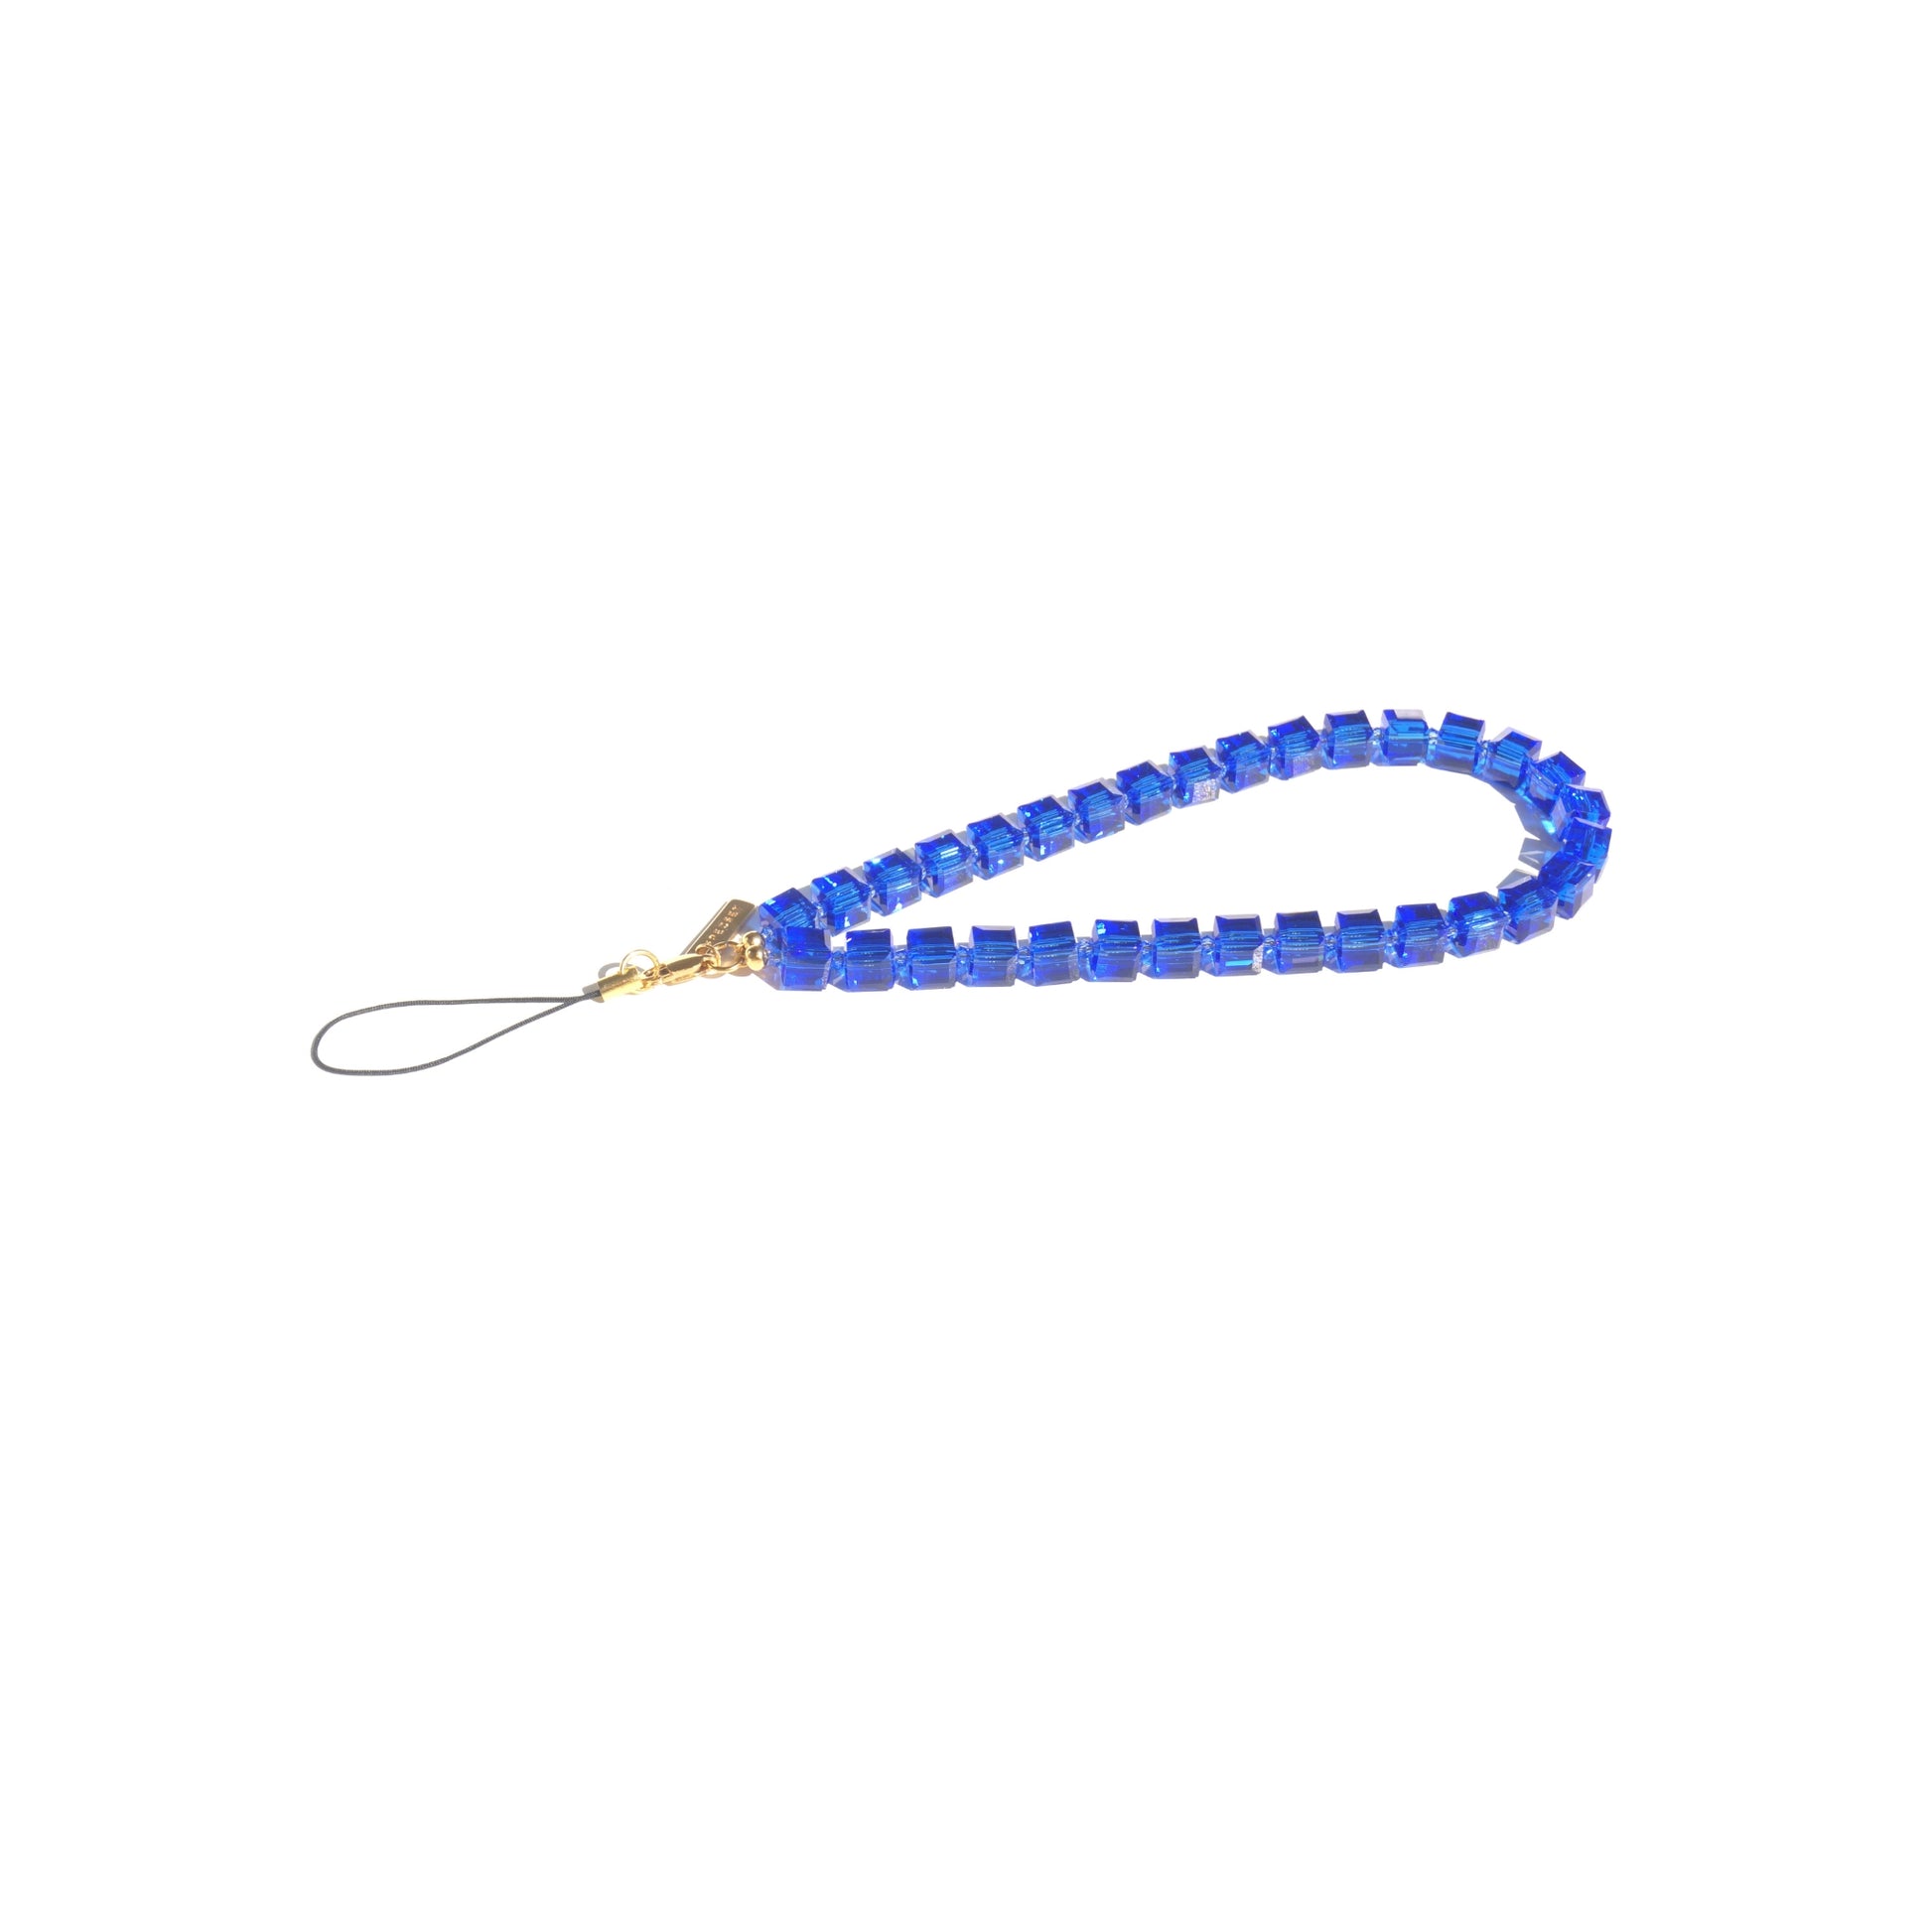 SPARKLY - BLUE Crystal Wrist Phone Strap | SPECSET